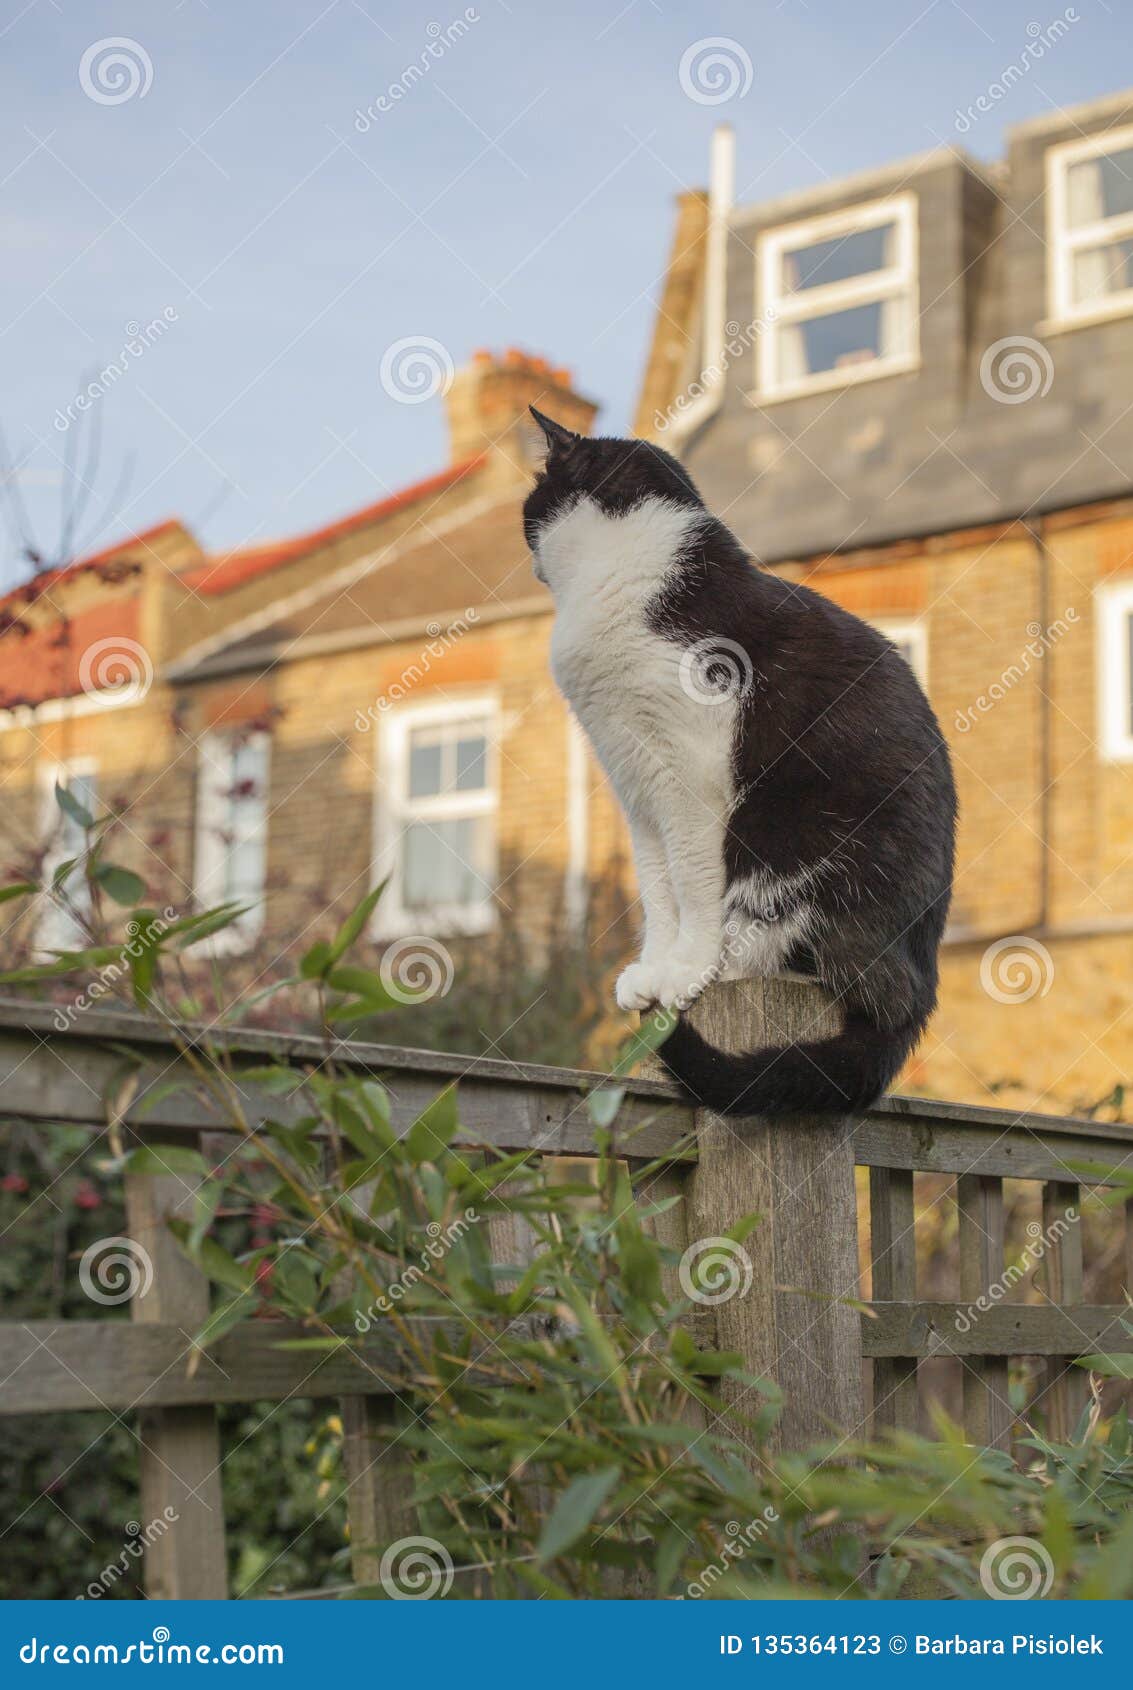 London England The Uk A White And Black Cat Looking Away From The Camera Stock Image Image Of Fluffly Cuddly 135364123